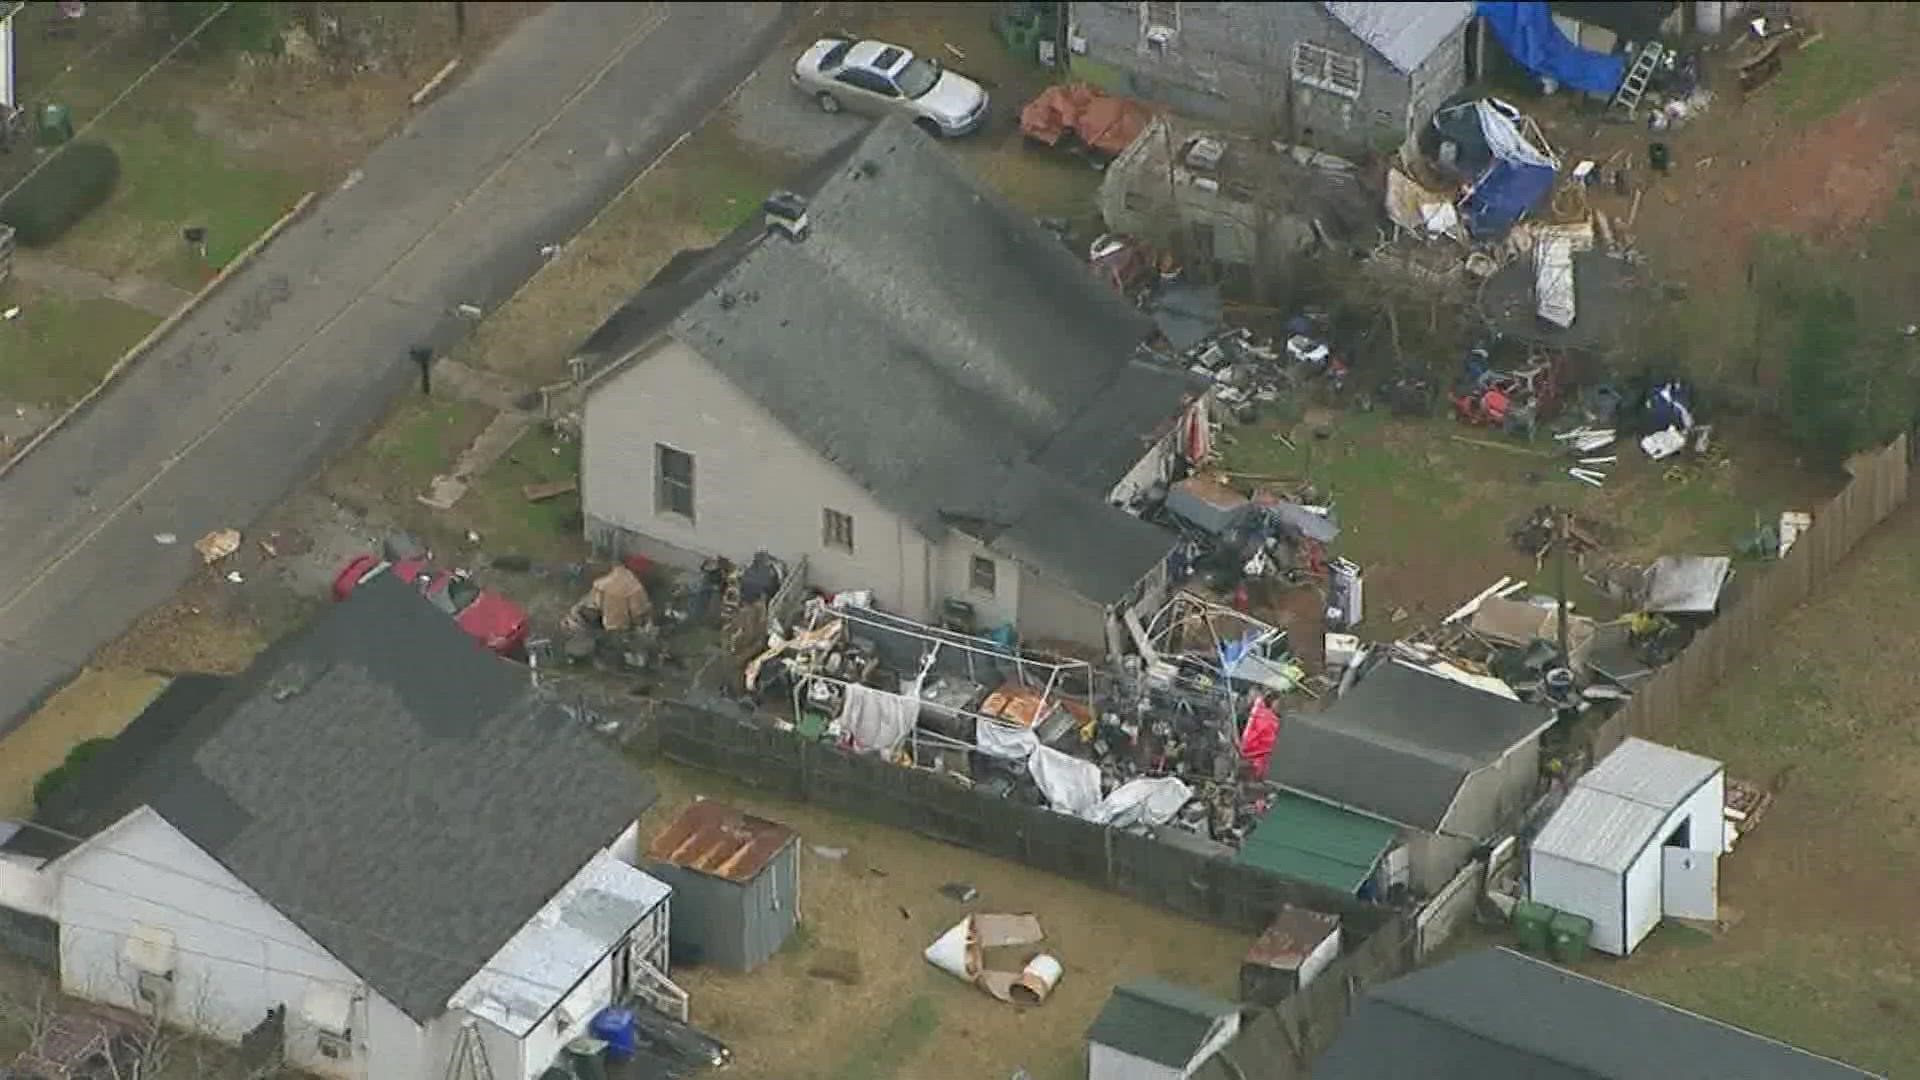 The National Weather Service confirmed that 10 counties were impacted by the tornadoes.